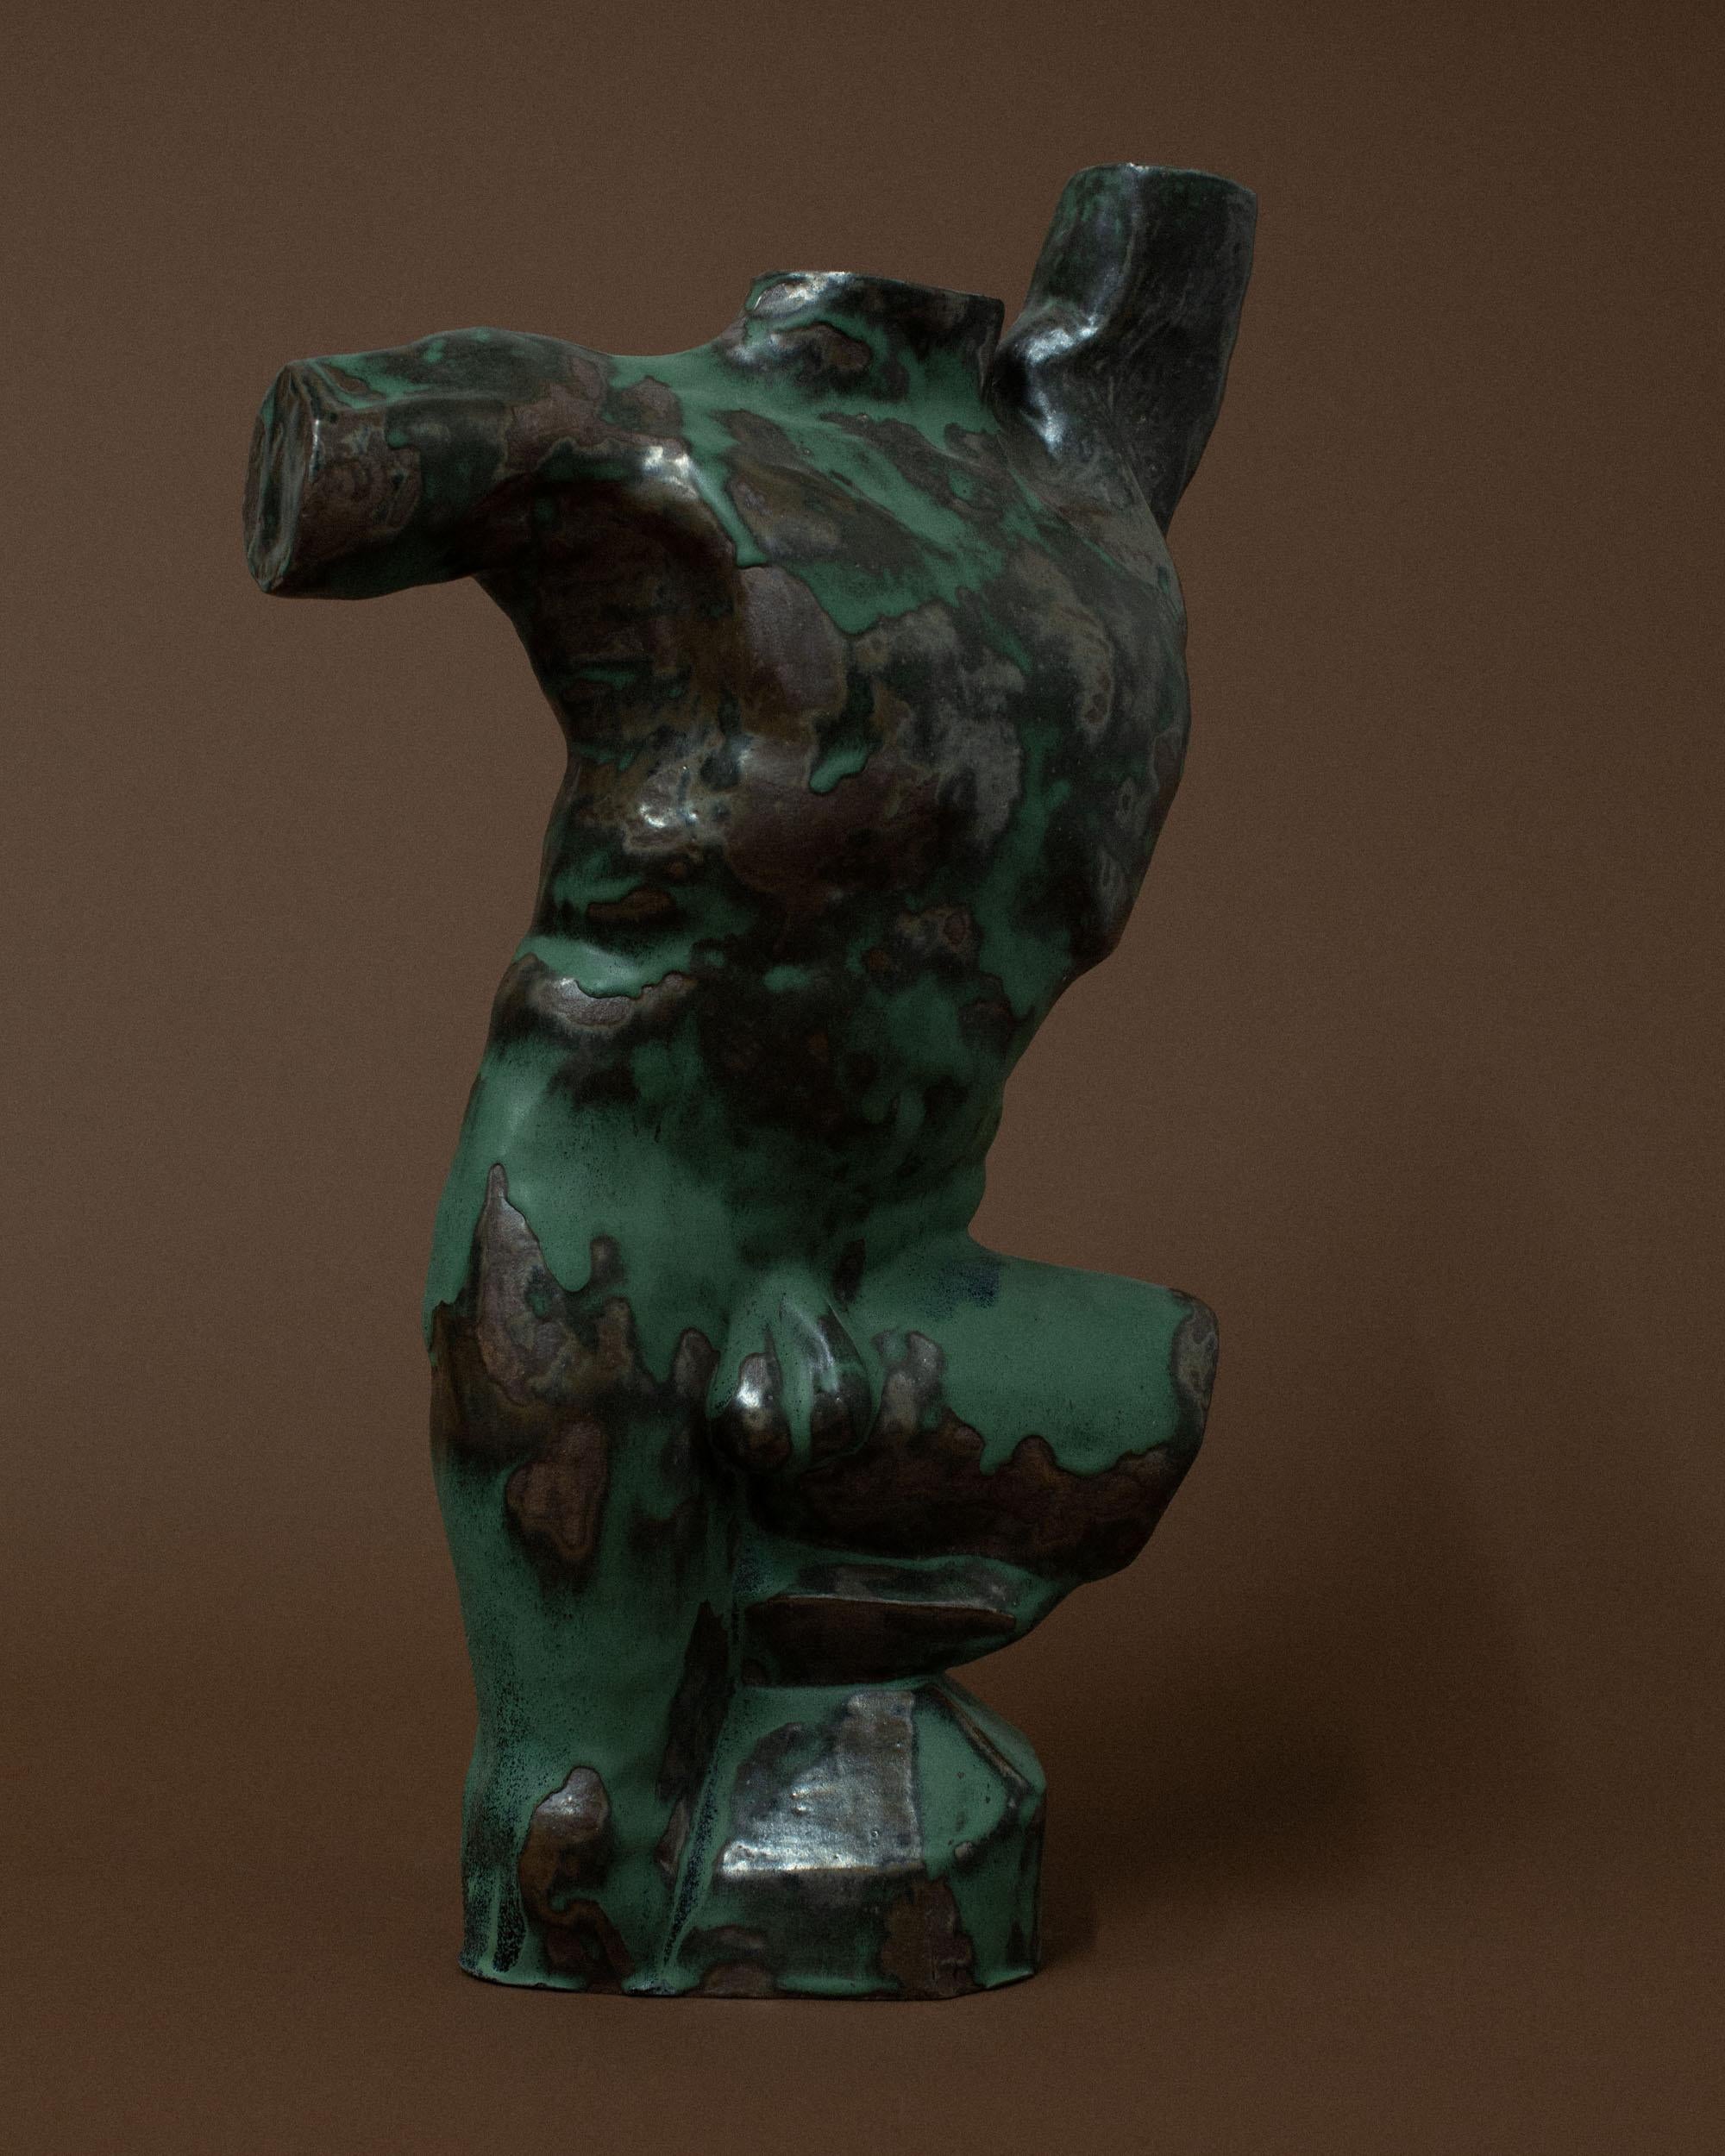 Green Male Torso Sculpture by Common Body
Dimensions: W 46 x D 26 x H 71 cm
Materials: Green Glazed and Rust Ceramic


Common body is a sculpture and interior object studio founded by nathaniel kyung smith, an artist whose passion lies in the